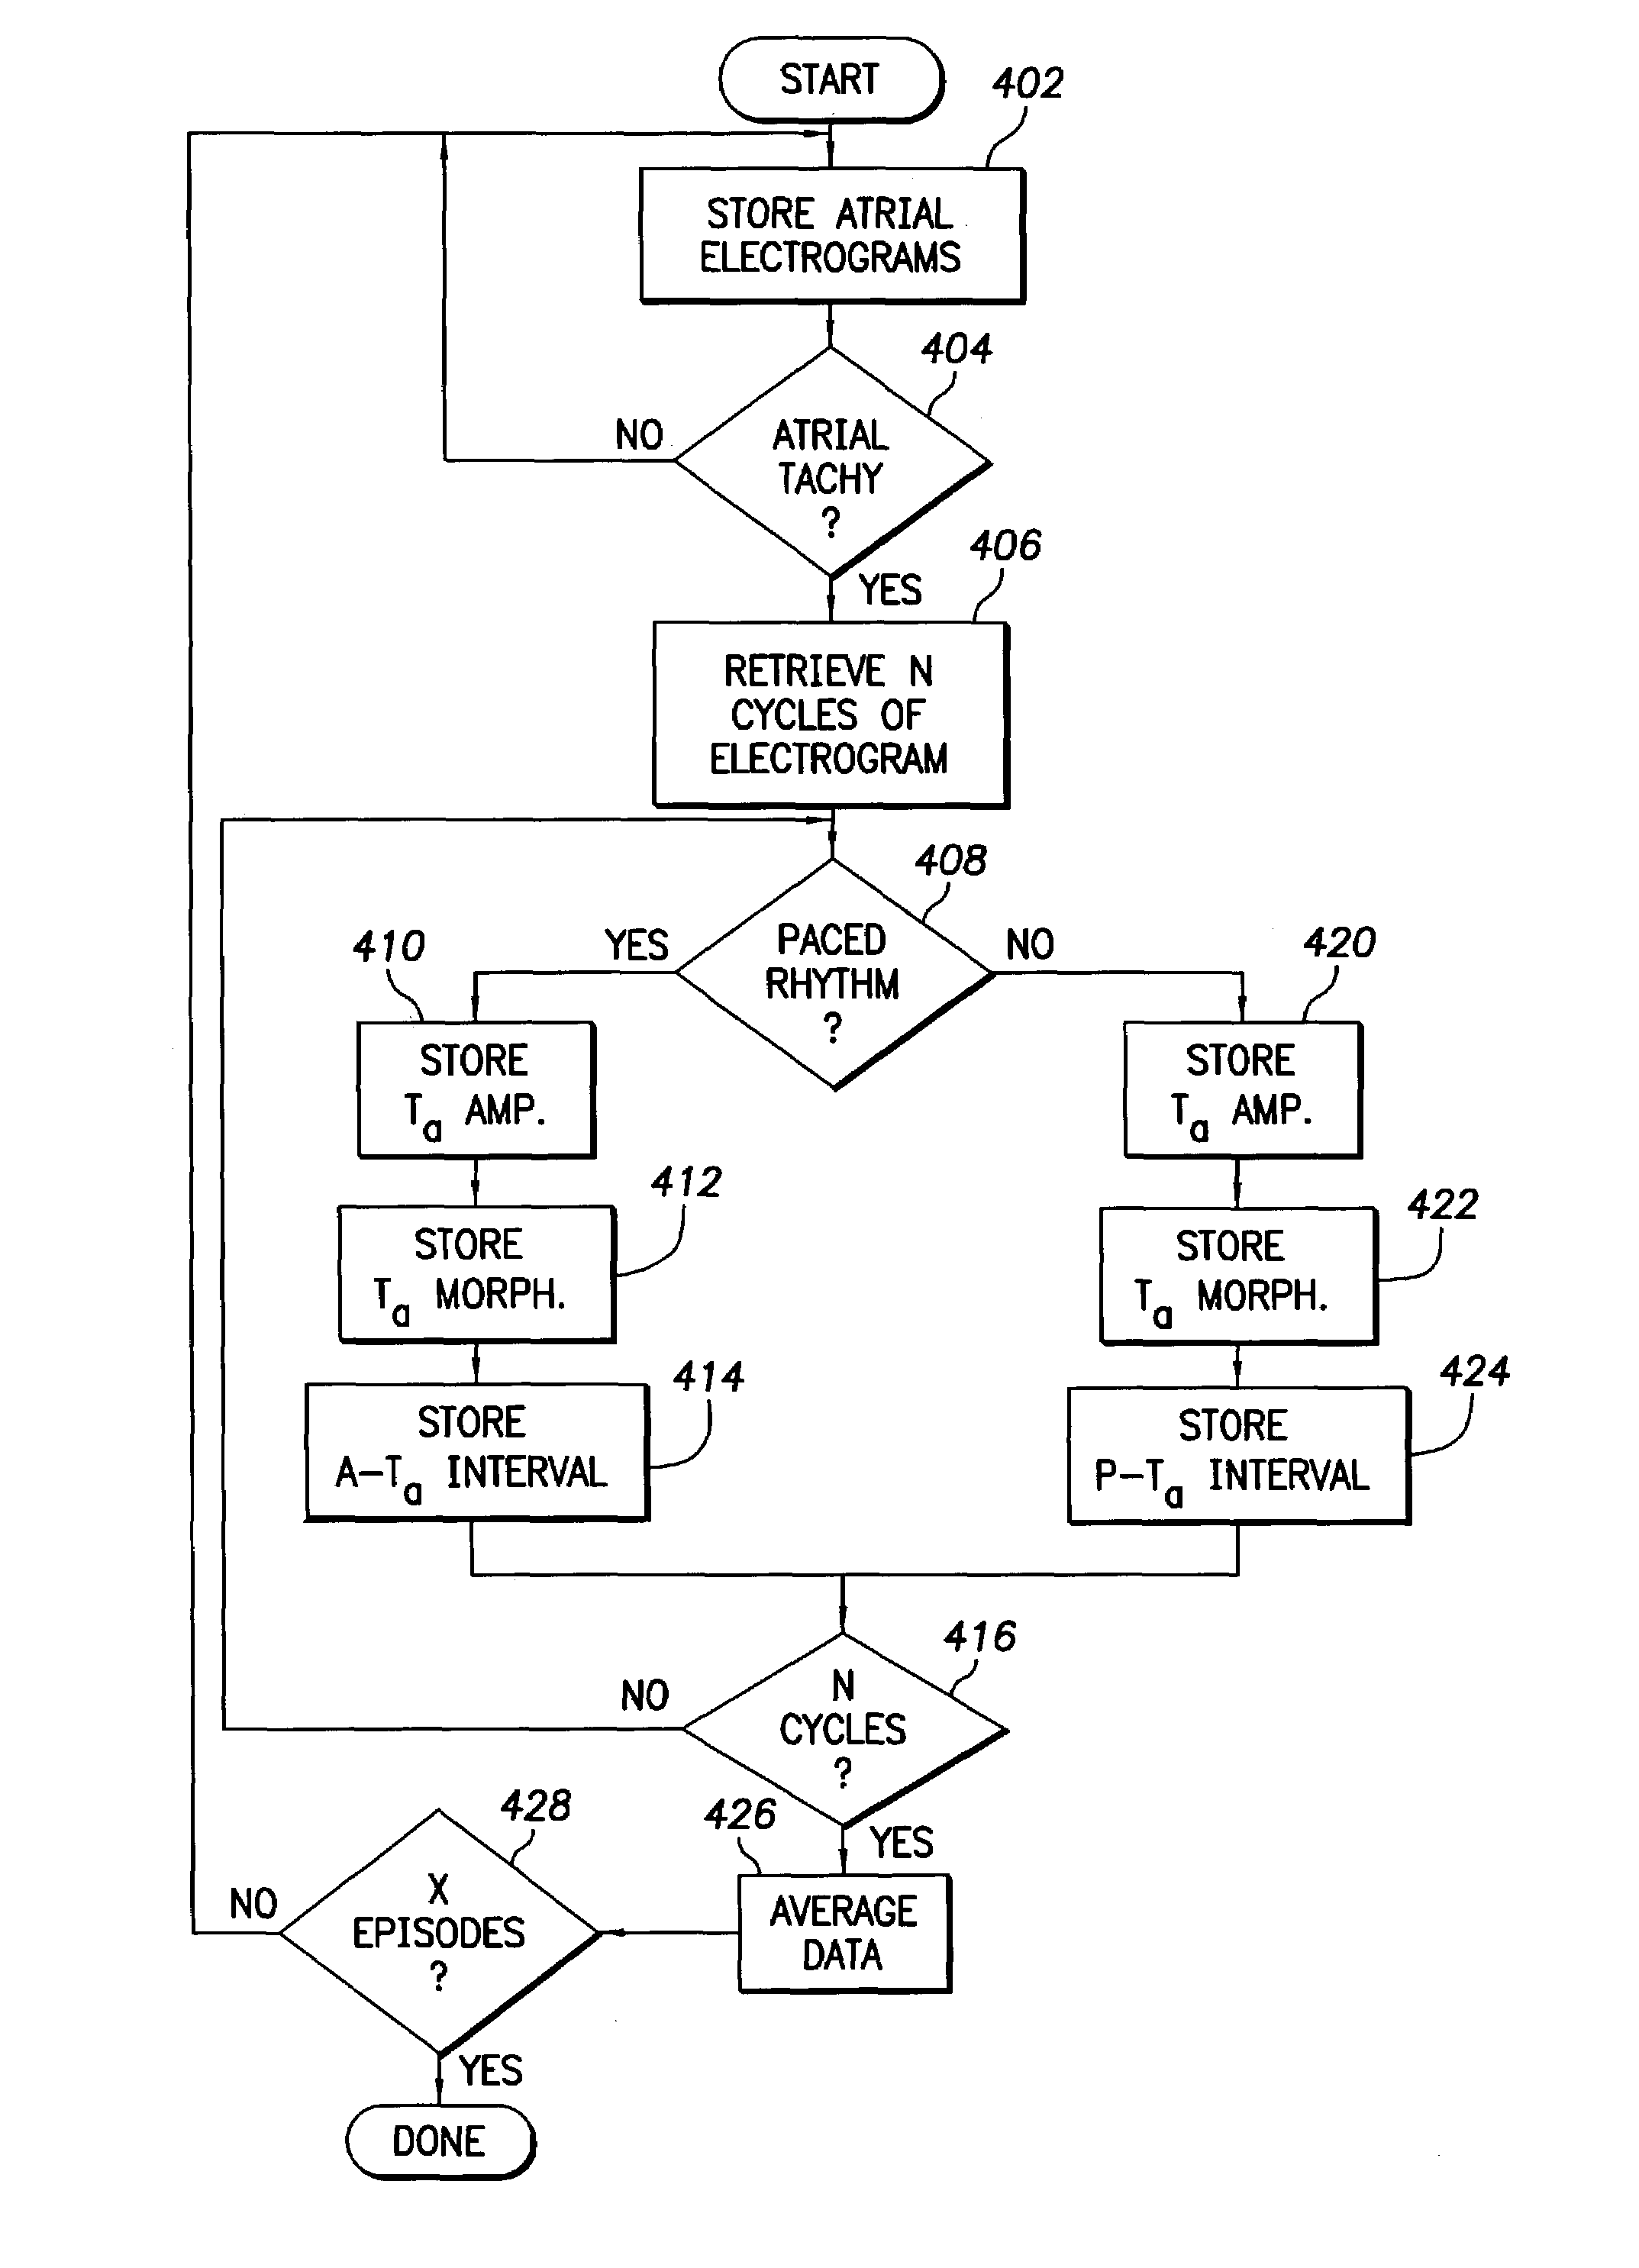 Implantable cardiac stimulation device, system and method that identifies and prevents impending arrhythmias of the atria